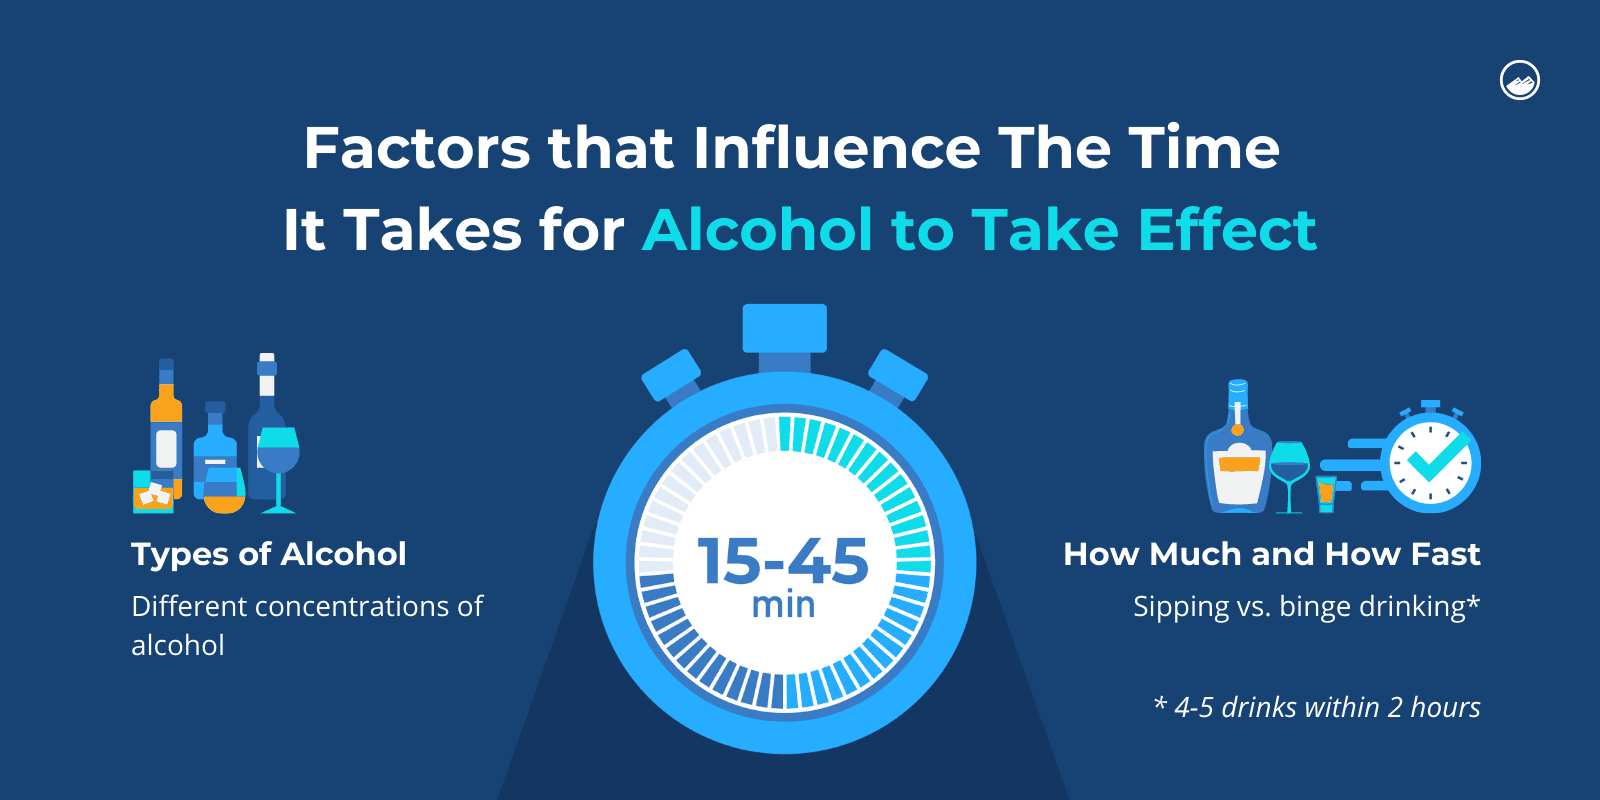 "Factors that Influences the time it takes for alcohol to take effect" demonstrated with relevant graphics